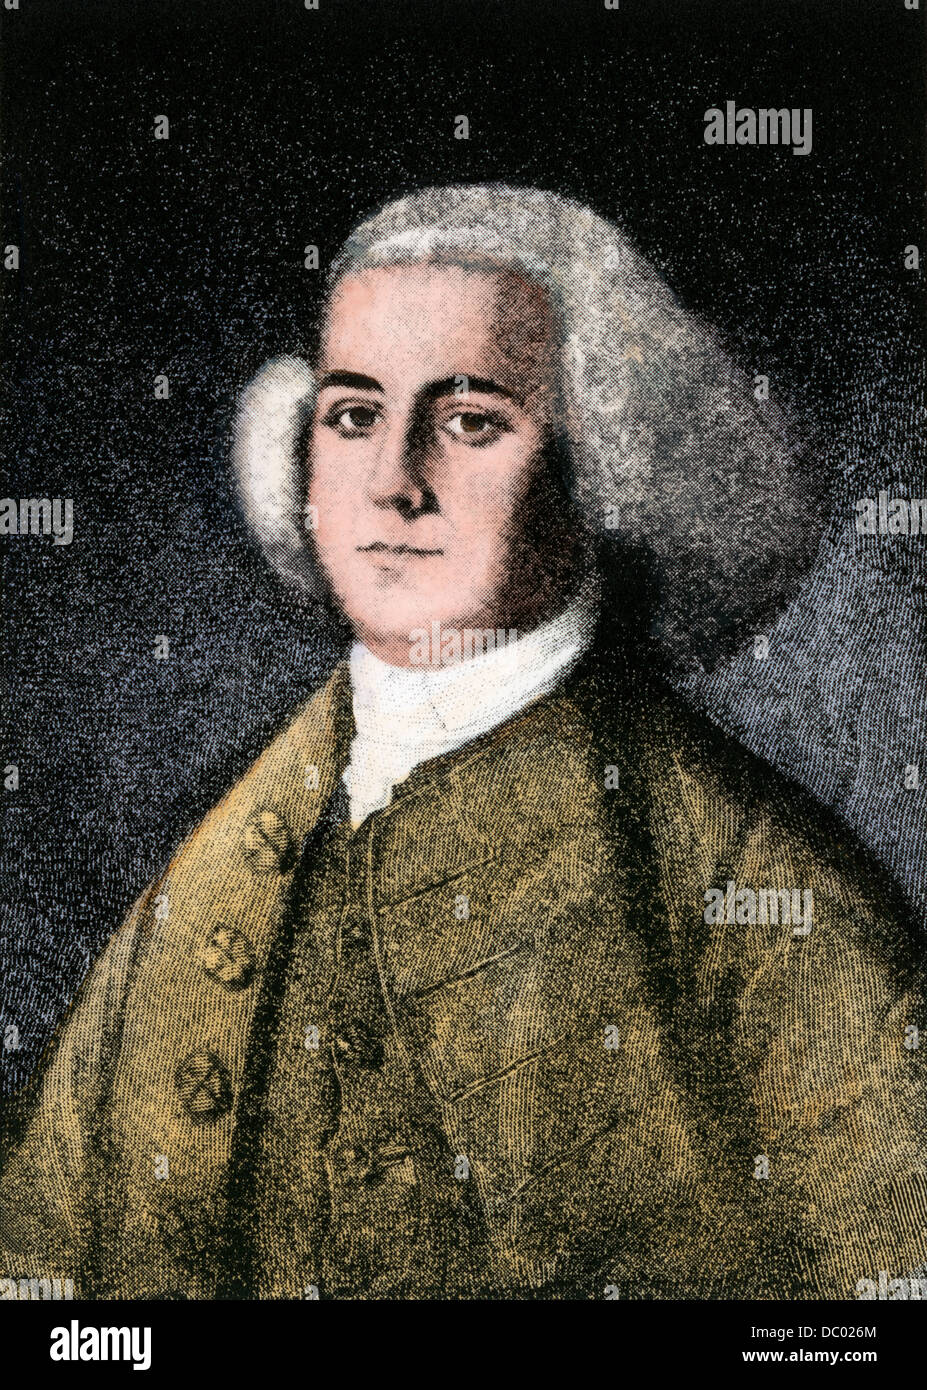 John Adams in 1765. Hand-colored halftone reproduction of a portrait Stock Photo